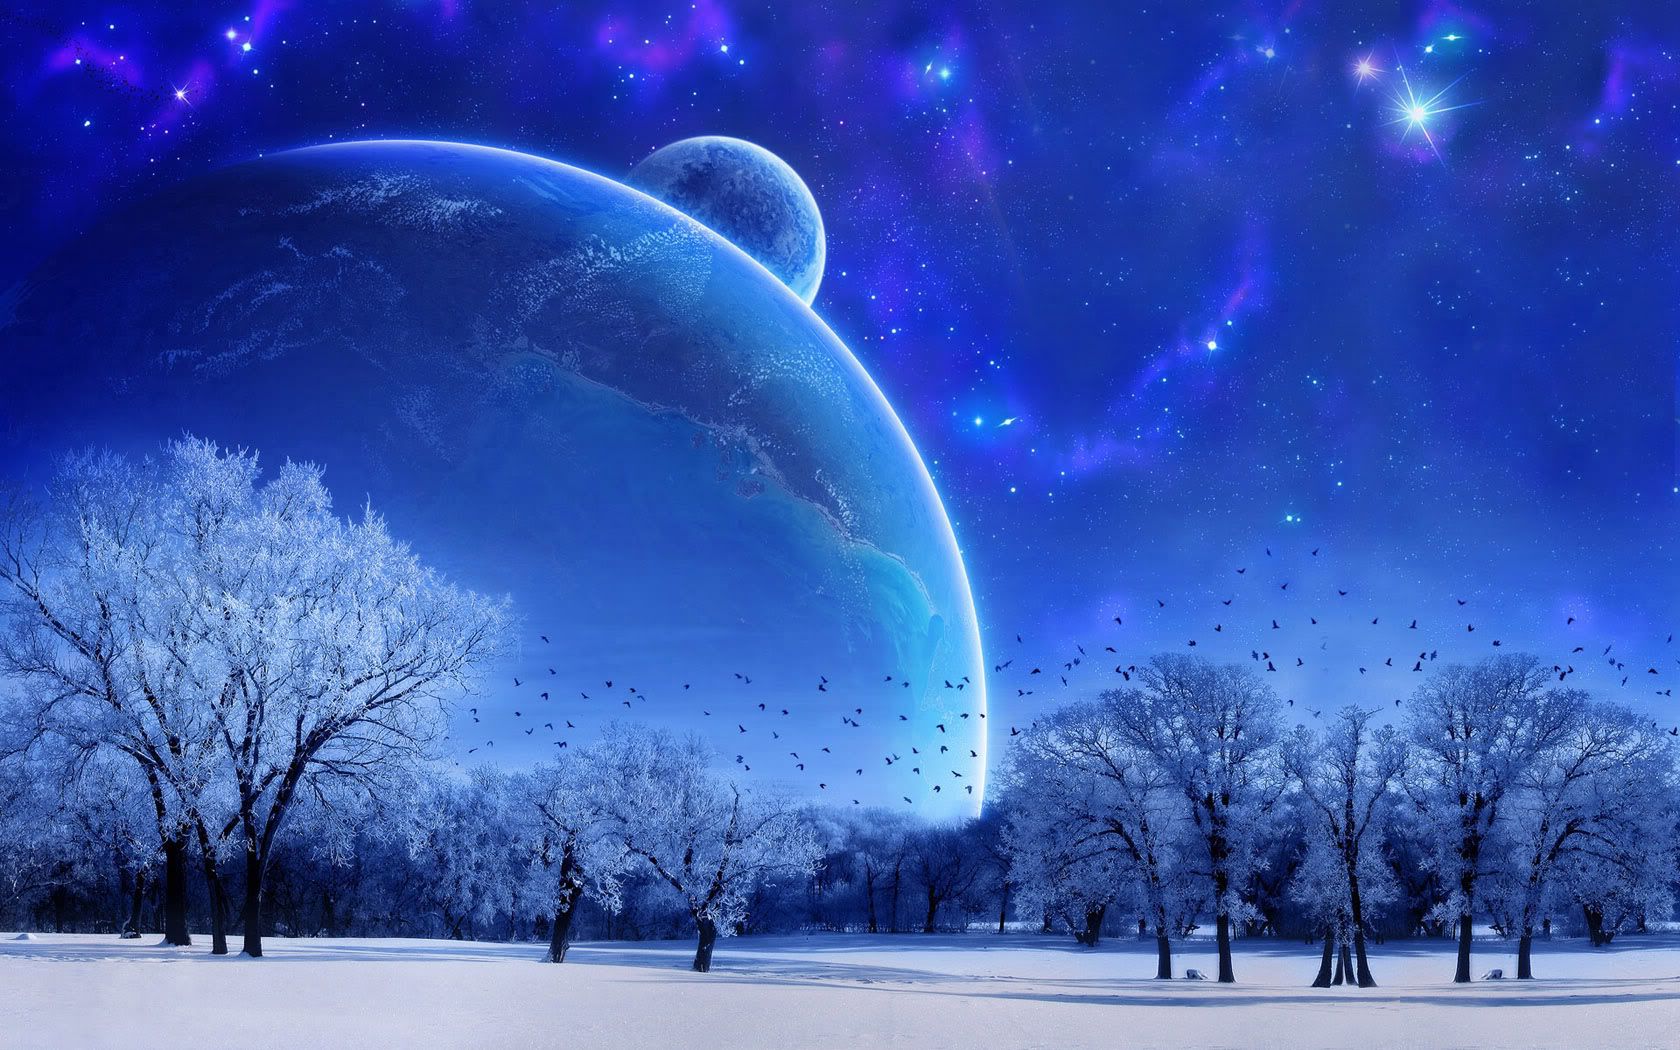 Free Download Download High Quality Peacefull Winter Science Fiction Sci Fi [1680x1050] For Your Desktop, Mobile & Tablet. Explore Sci Fi Wallpaper Free. Sci Fi Wallpaper, Sci Fi Wallpaper High